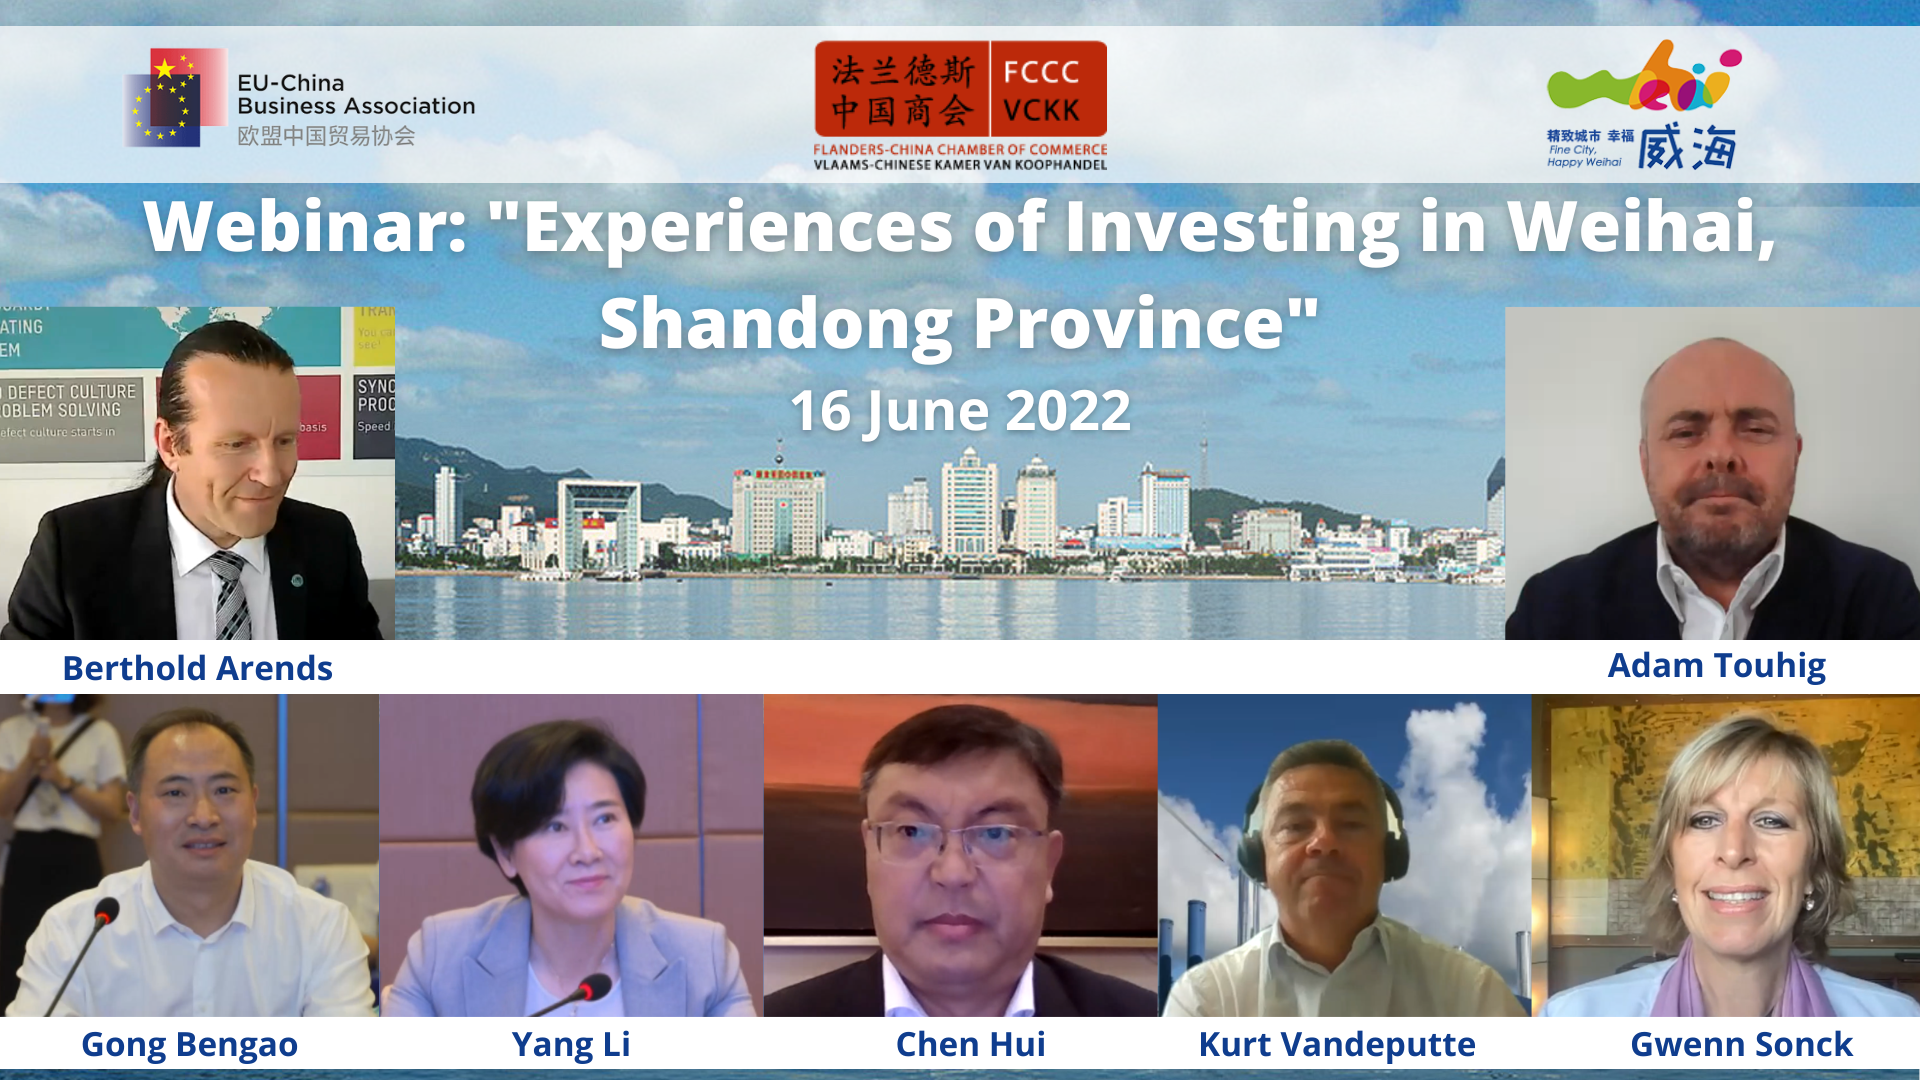 Webinar: “Experiences of Investing in Weihai, Shandong Province” – June 16, 2022